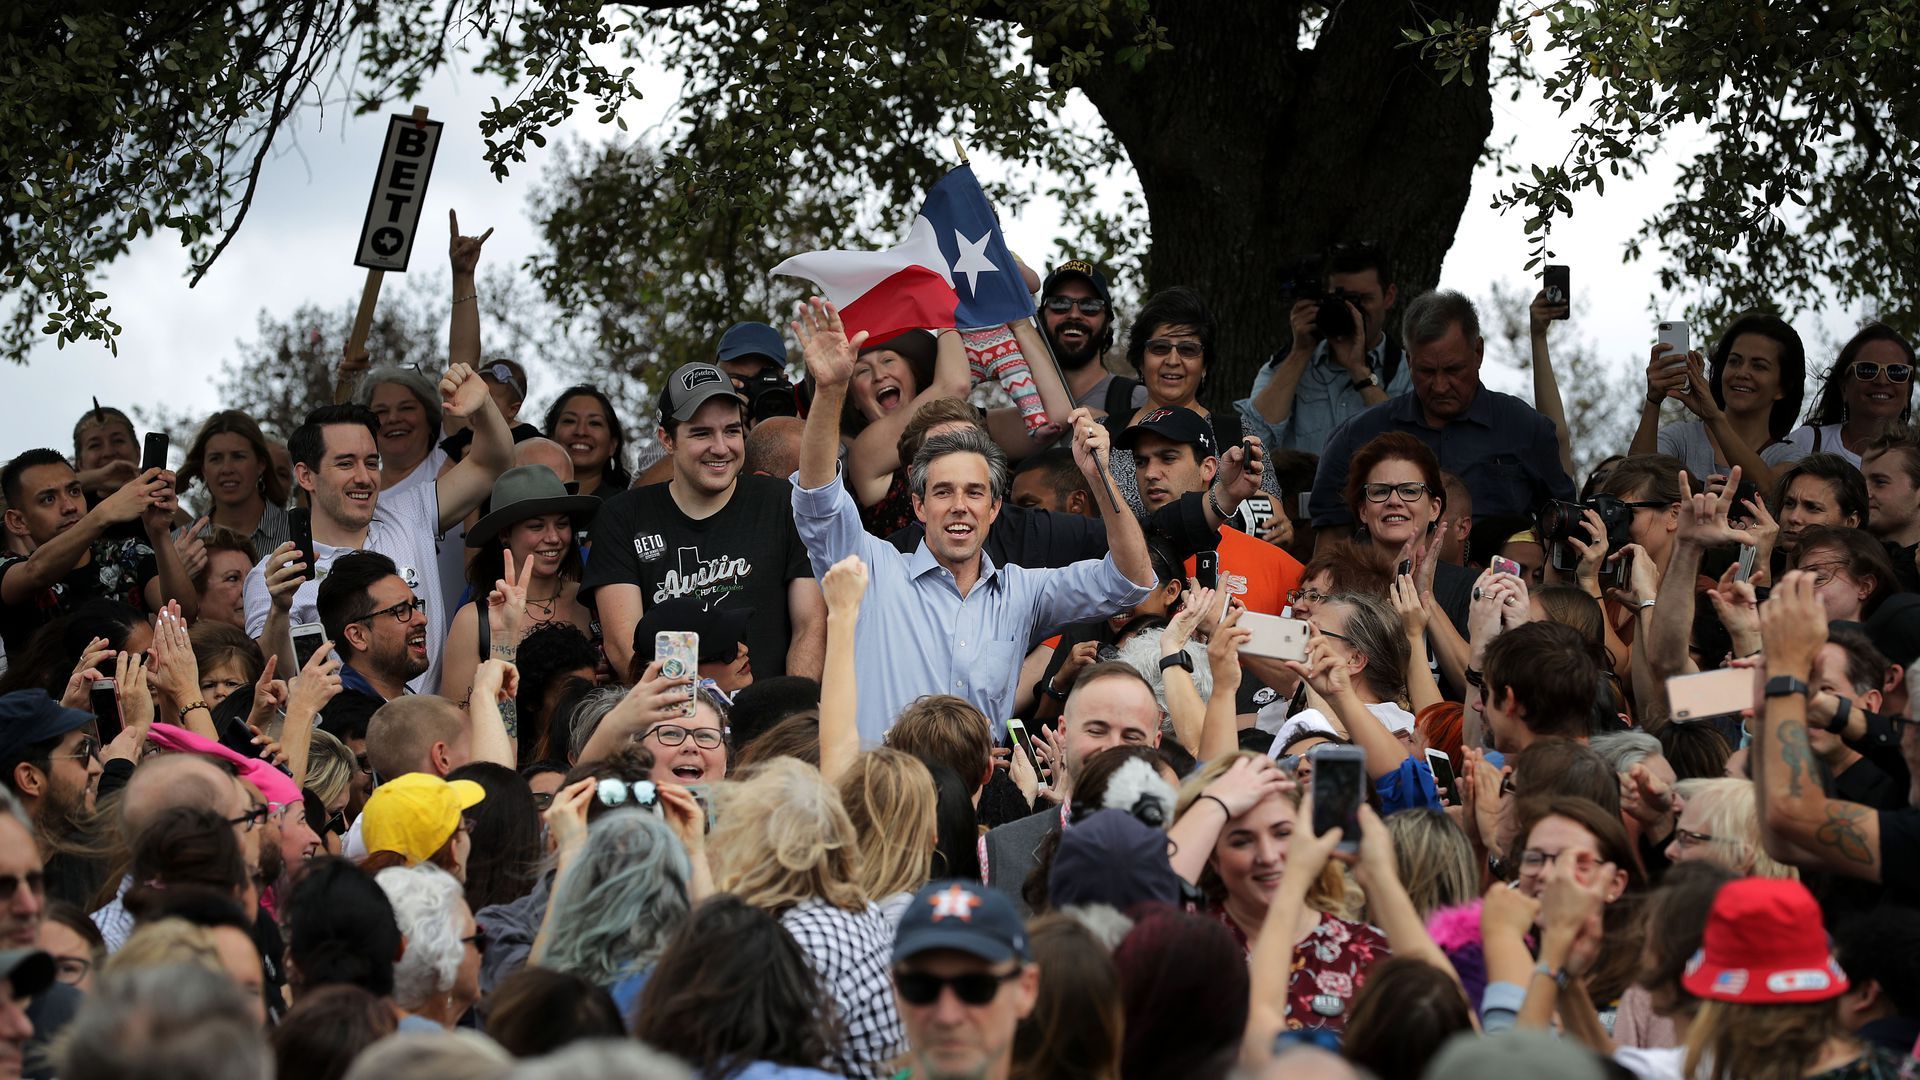 A photo of Beto O'Rourke holding a Texas flag in a crowd of people.